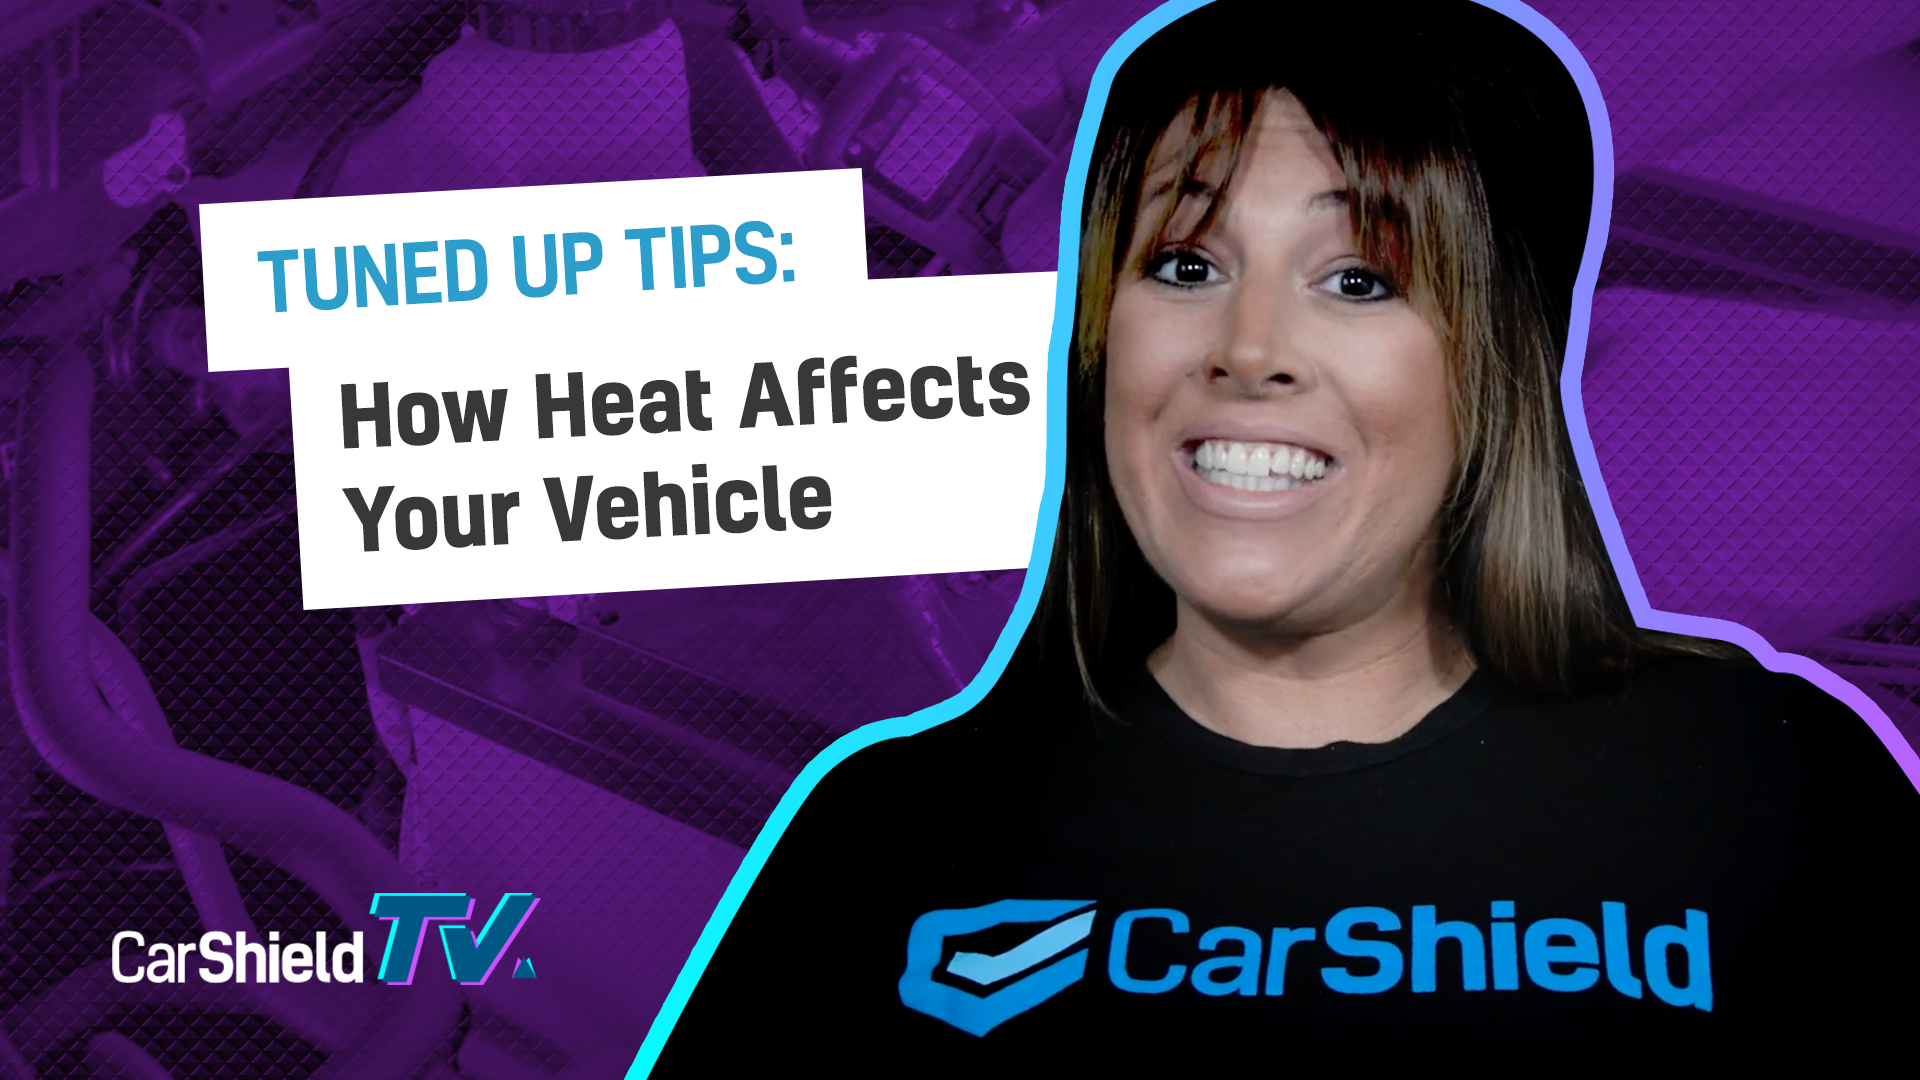 Tips for how heact affects your vehicle